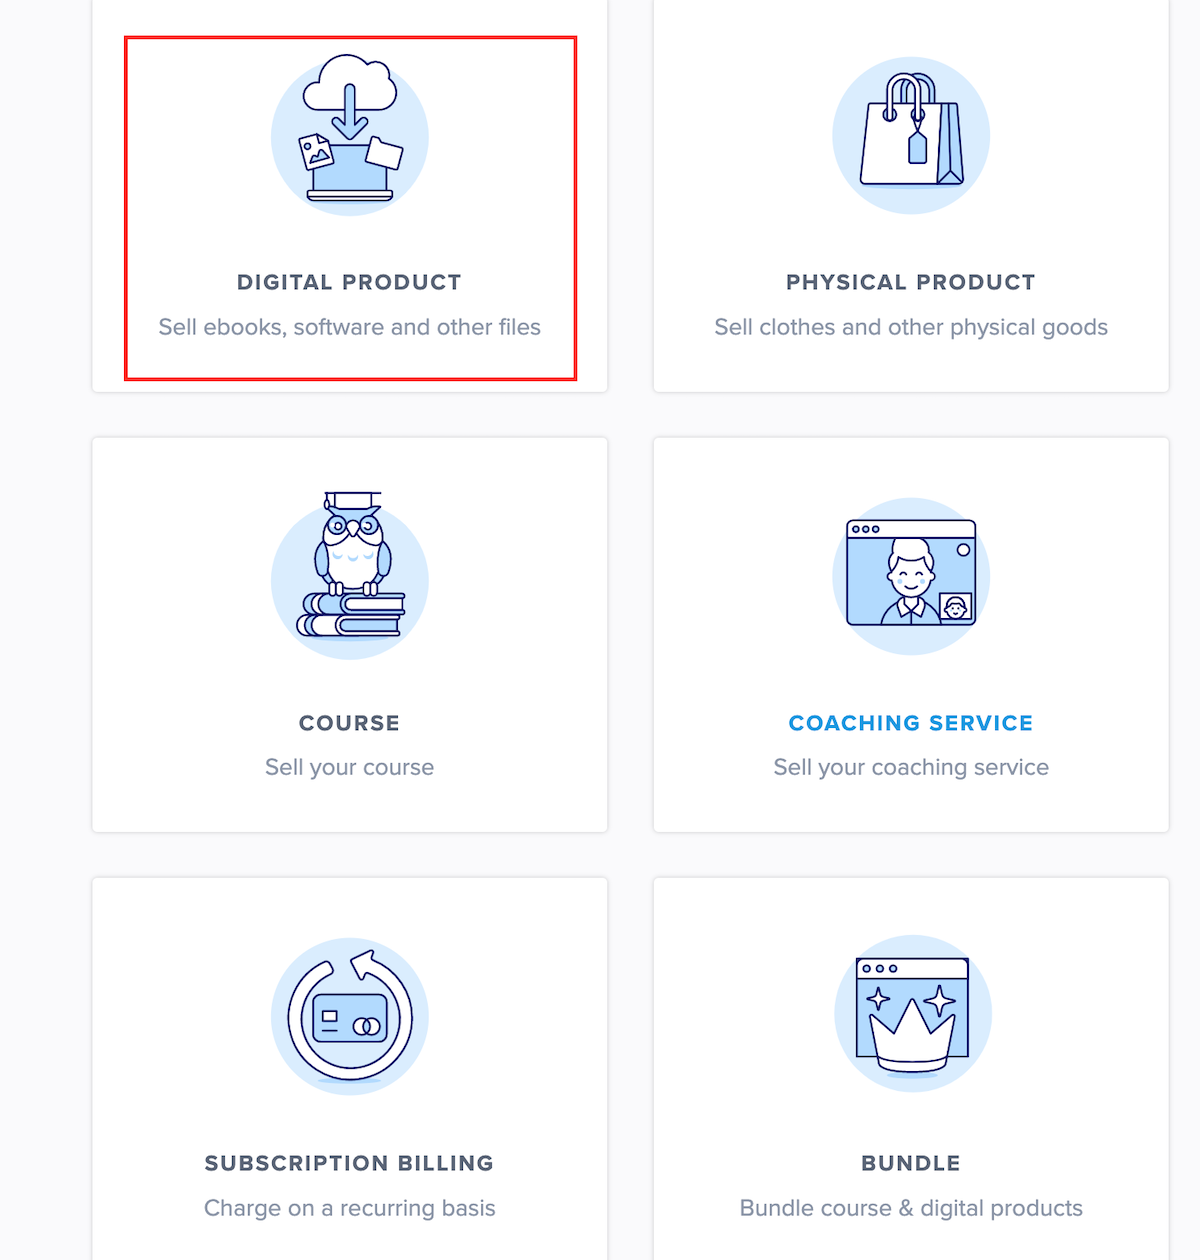 Create Product in Payhip